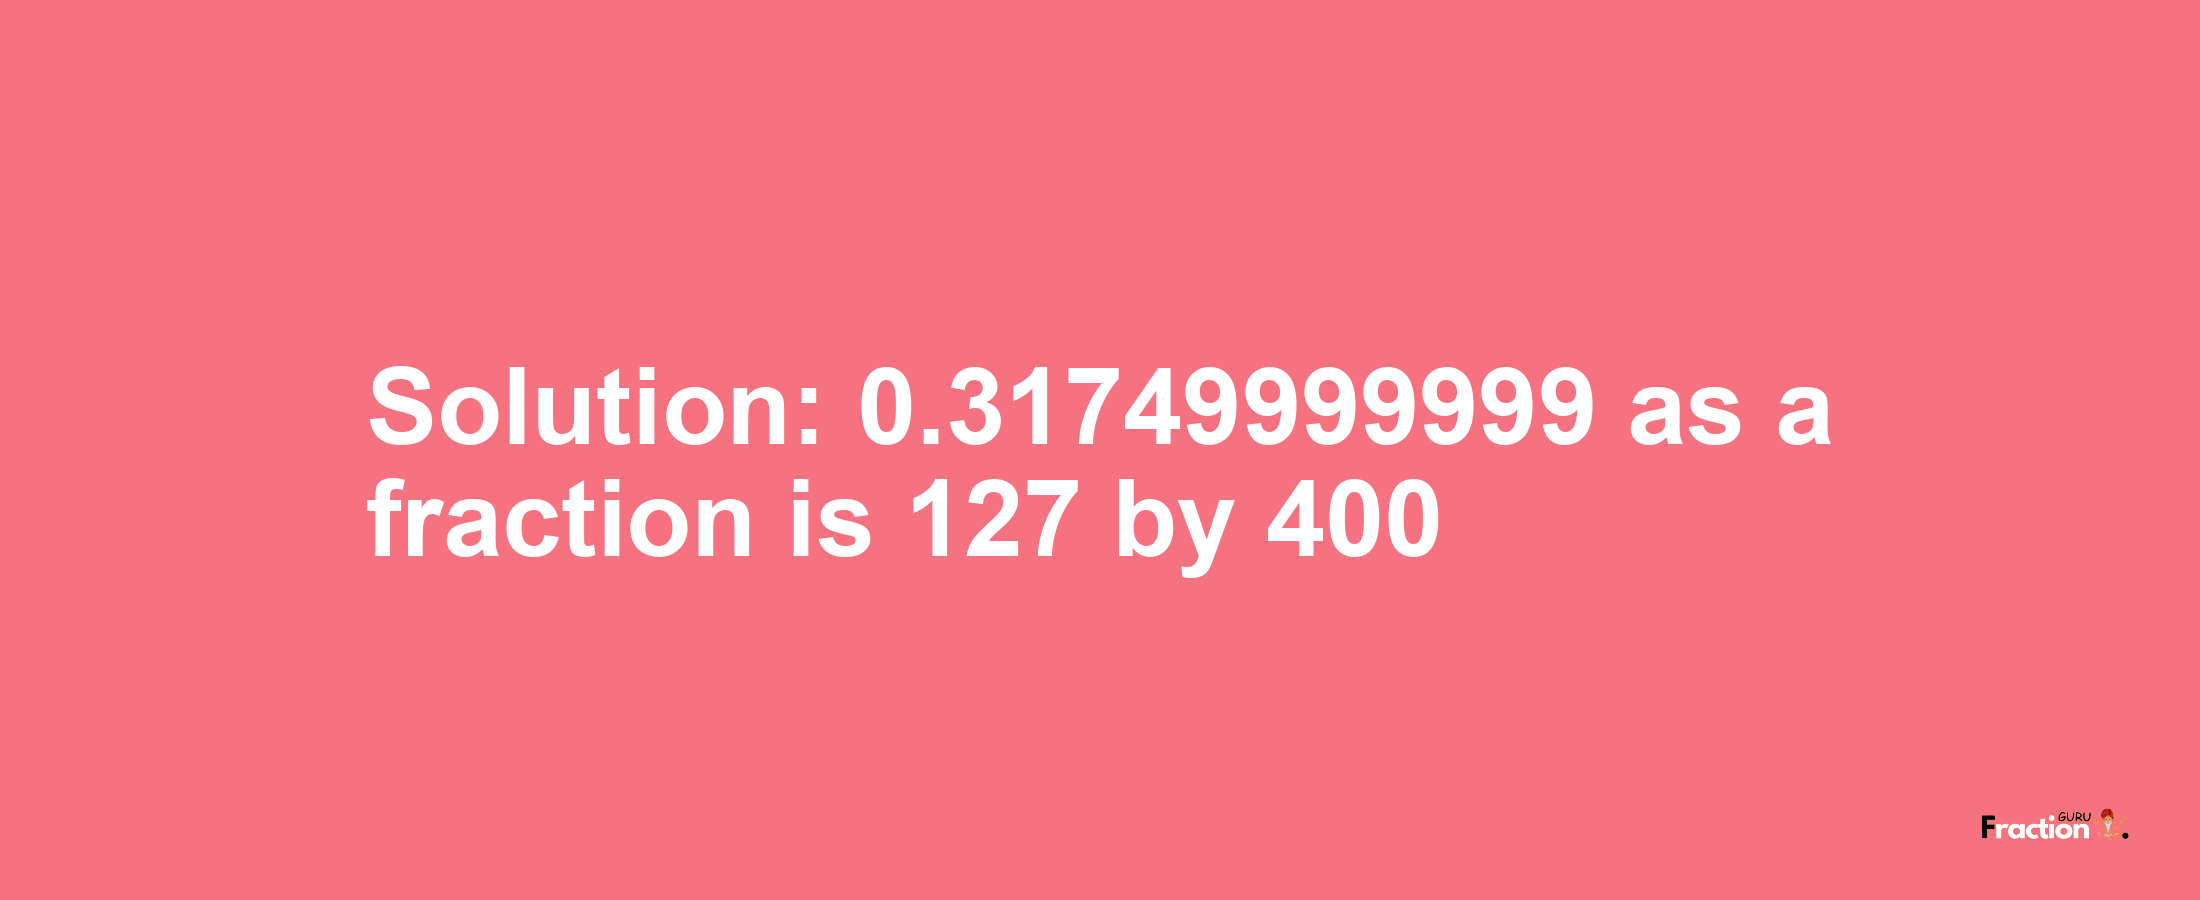 Solution:0.31749999999 as a fraction is 127/400